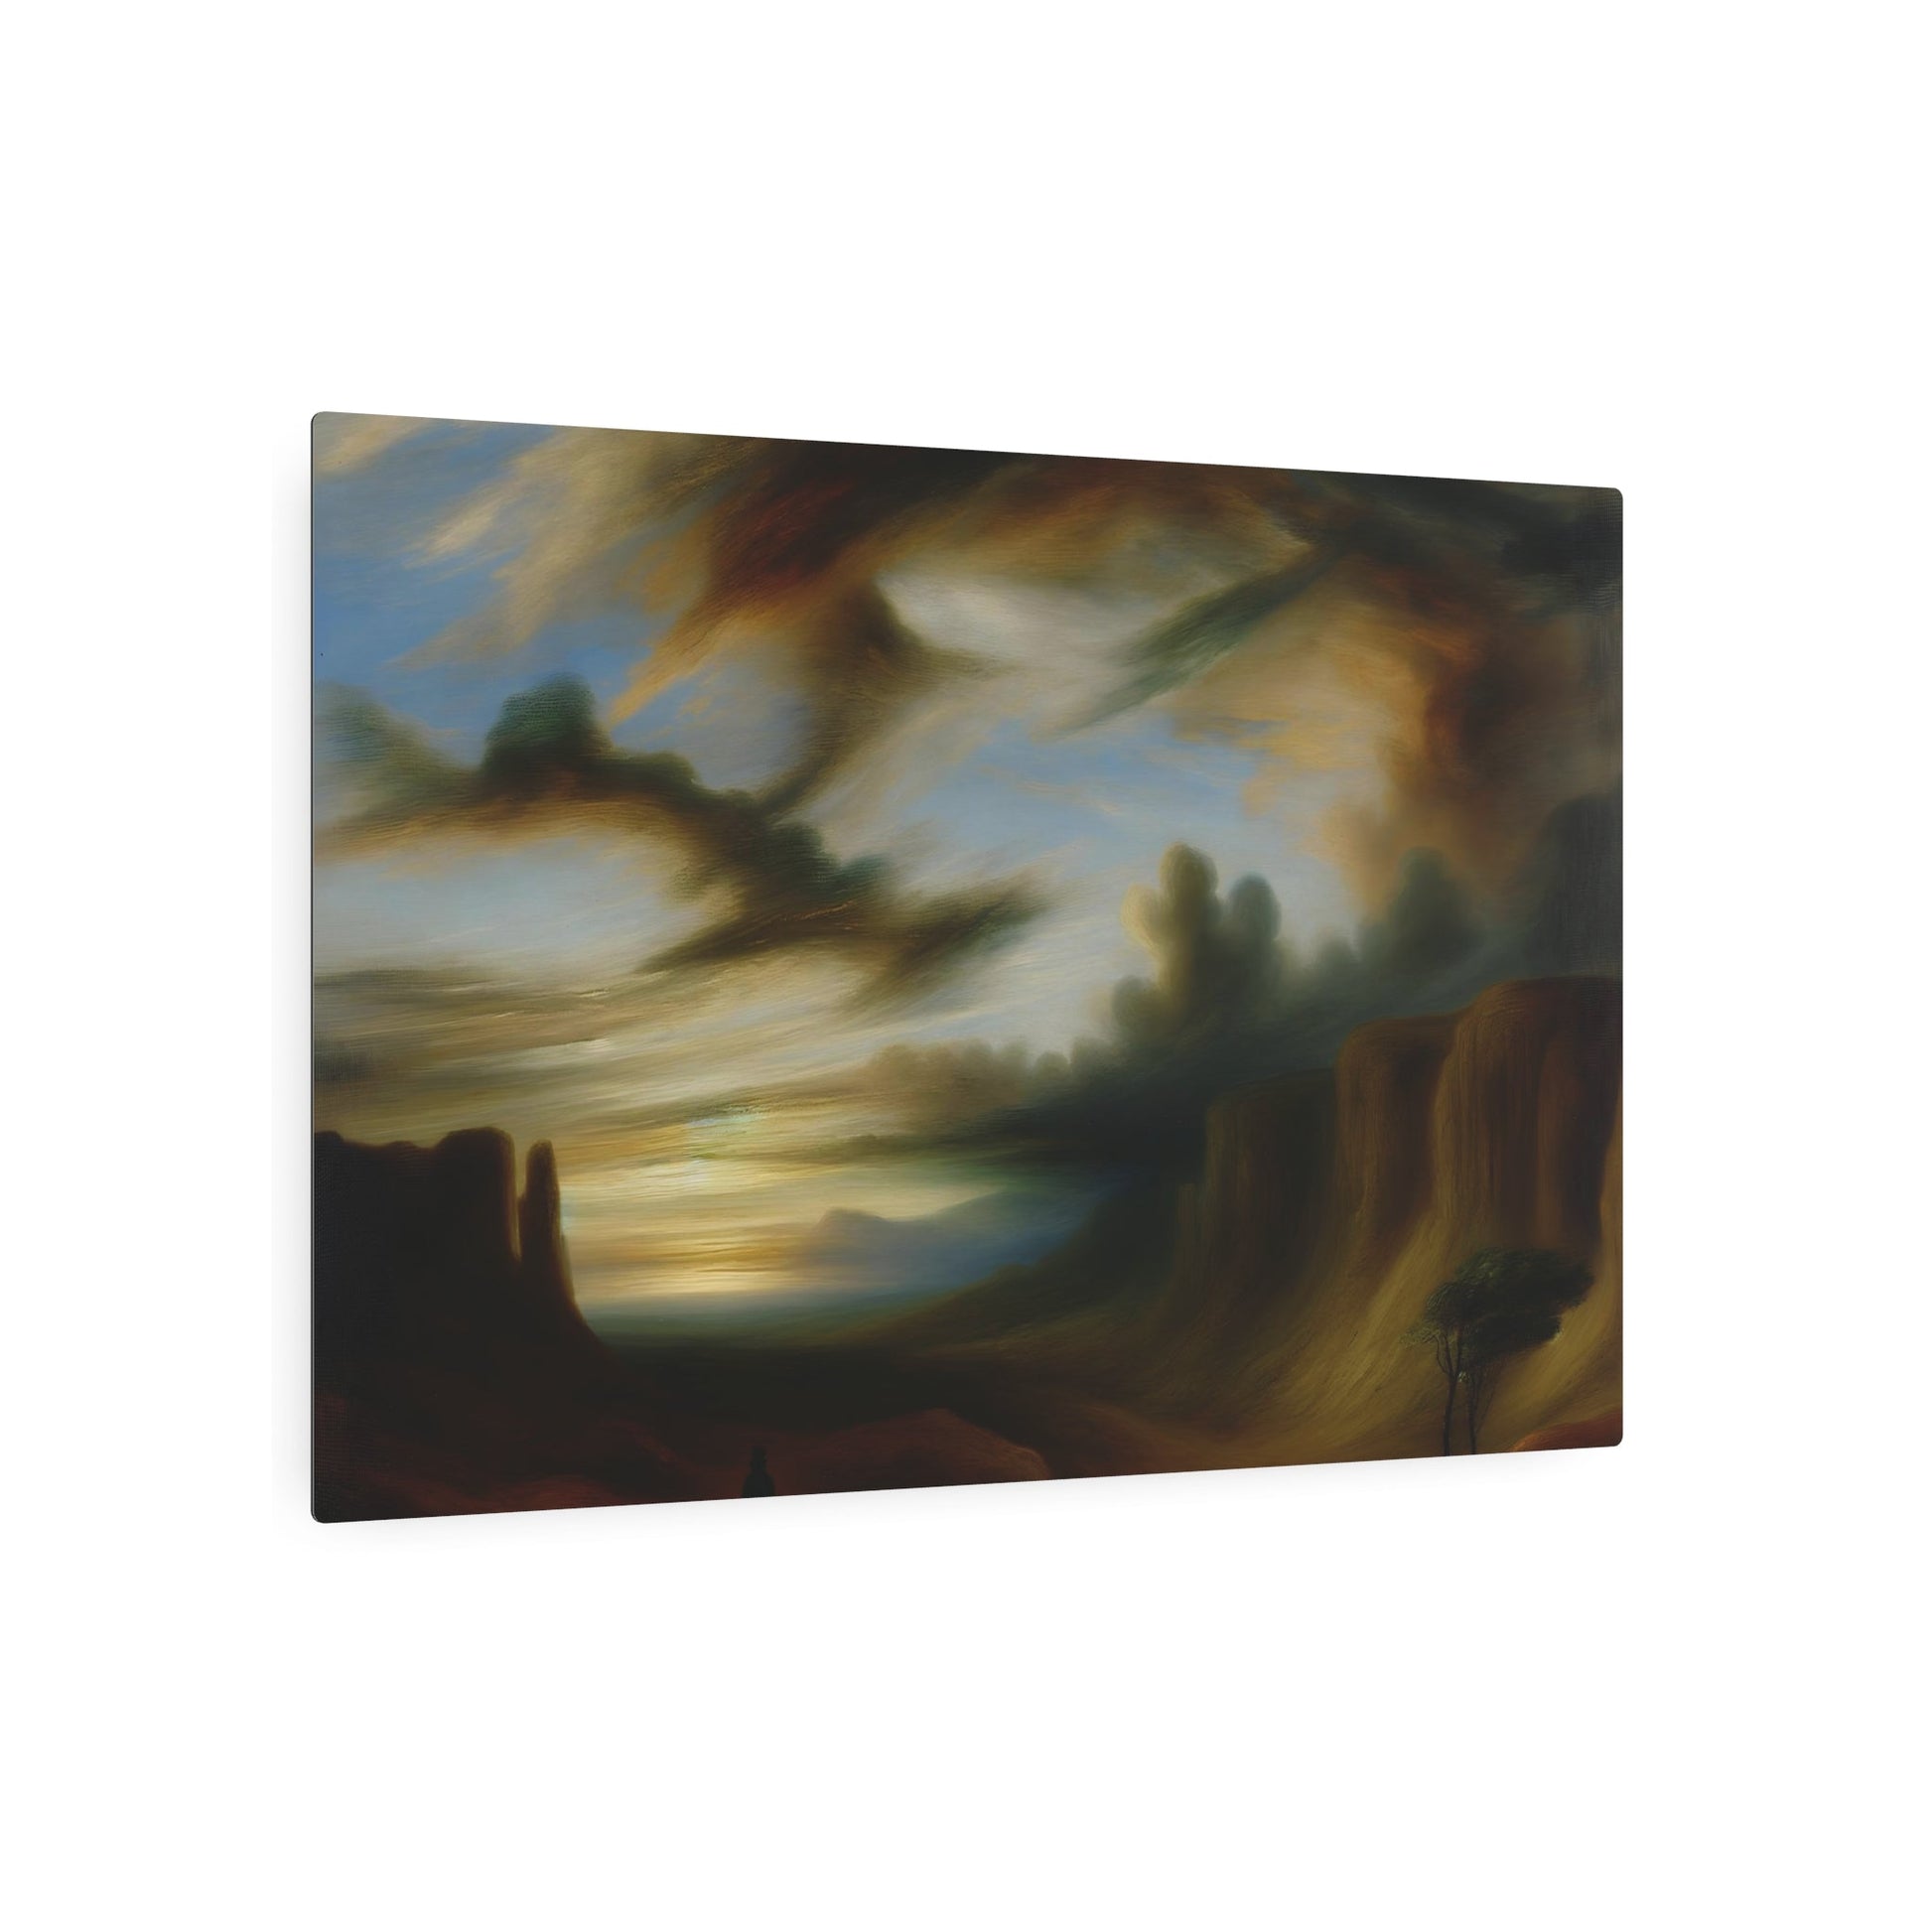 Metal Poster Art | "Romanticism Western Art - Atmospheric Landscape with Dramatic Contrasts, Powerful Sunset and Lone Figure Emphasizing Human Experience in Nature's Grandeur - Metal Poster Art 36″ x 24″ (Horizontal) 0.12''